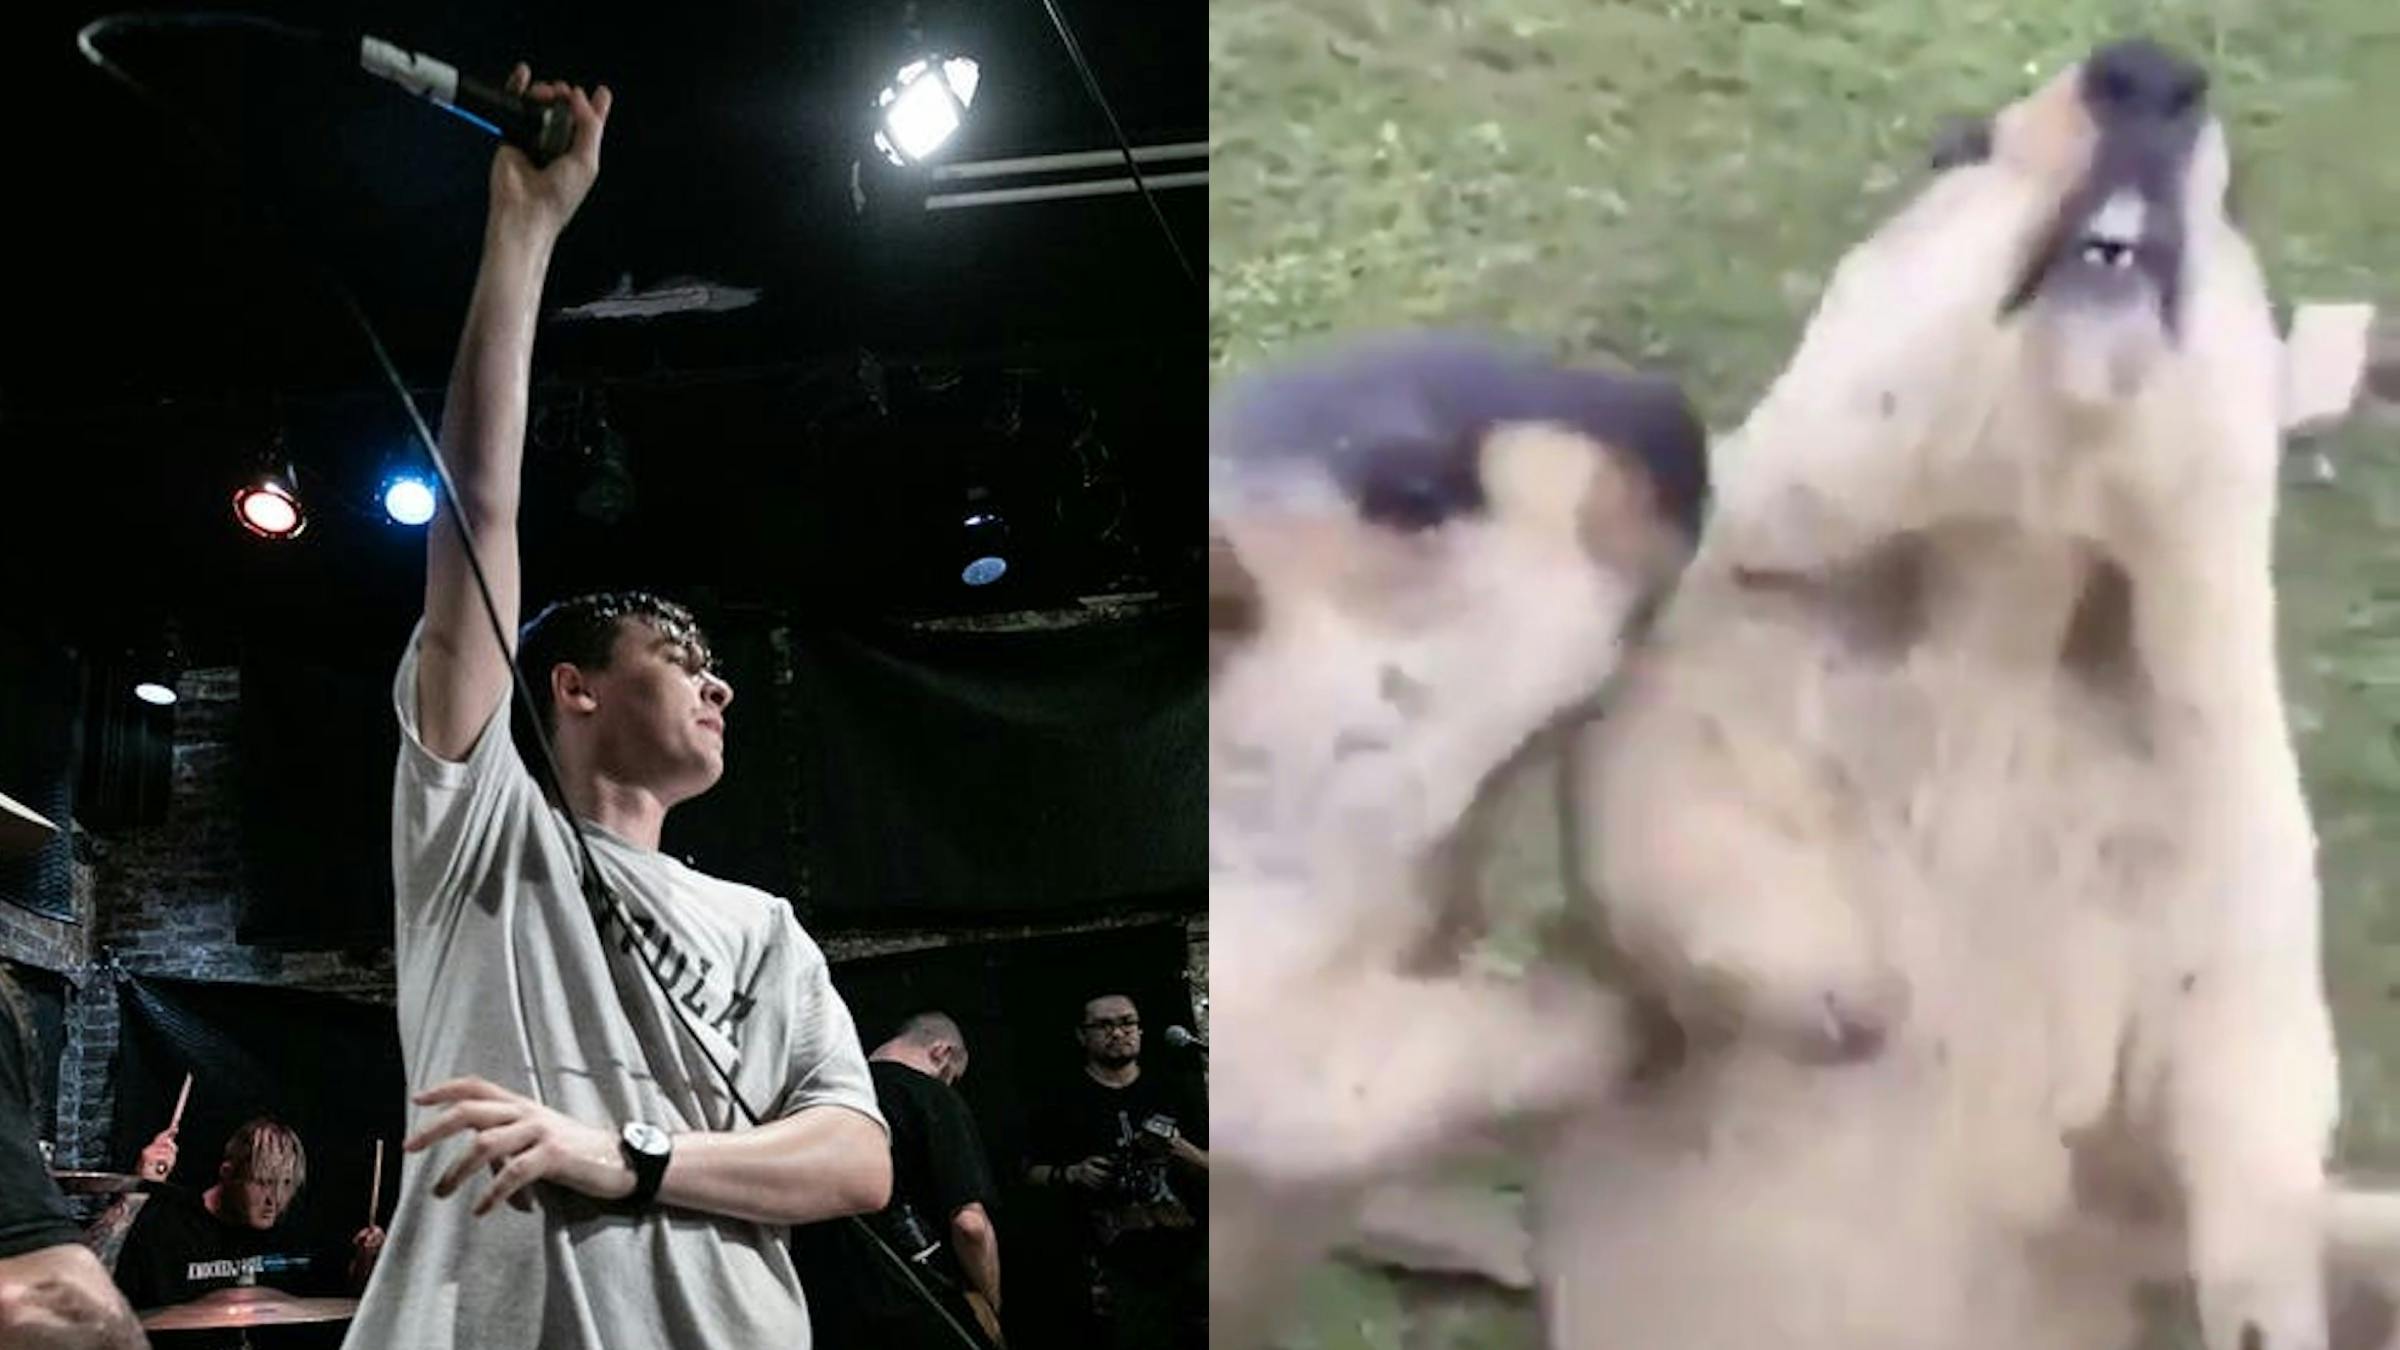 Groundhogs Moshing To Knocked Loose Will Make Your Day A Little Brighter